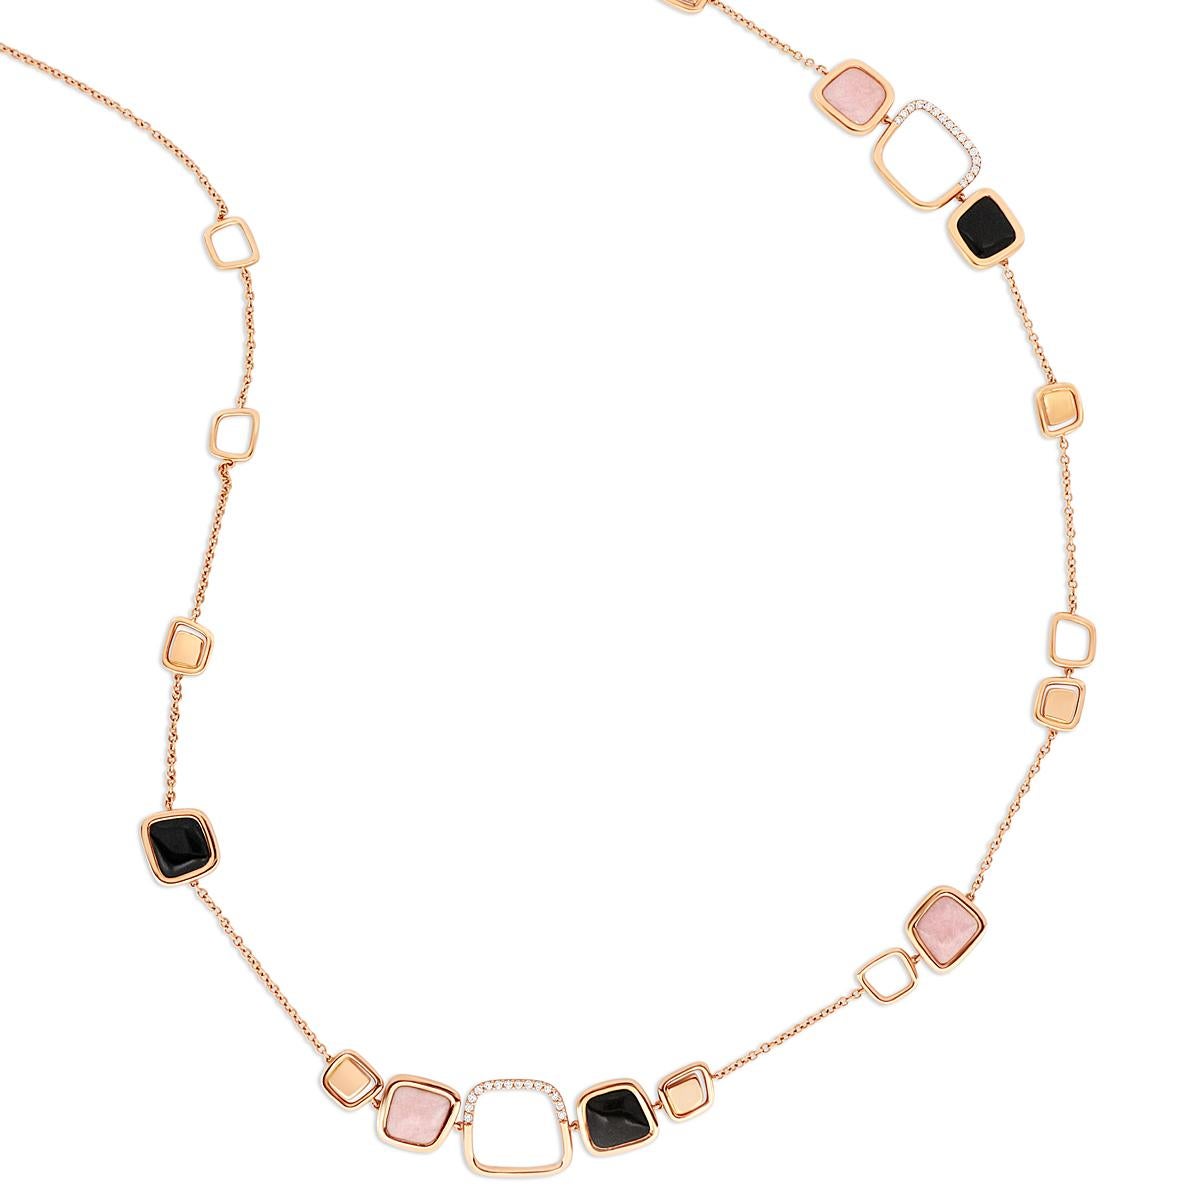 Dainty and feminine, this modern, Italian necklace will graciously add a touch of color and light to your outfit.
The square necklace is set with two semi-precious stones: pink opal and onyx.

Pink opal, as an opal gemstone, intrinsically represents